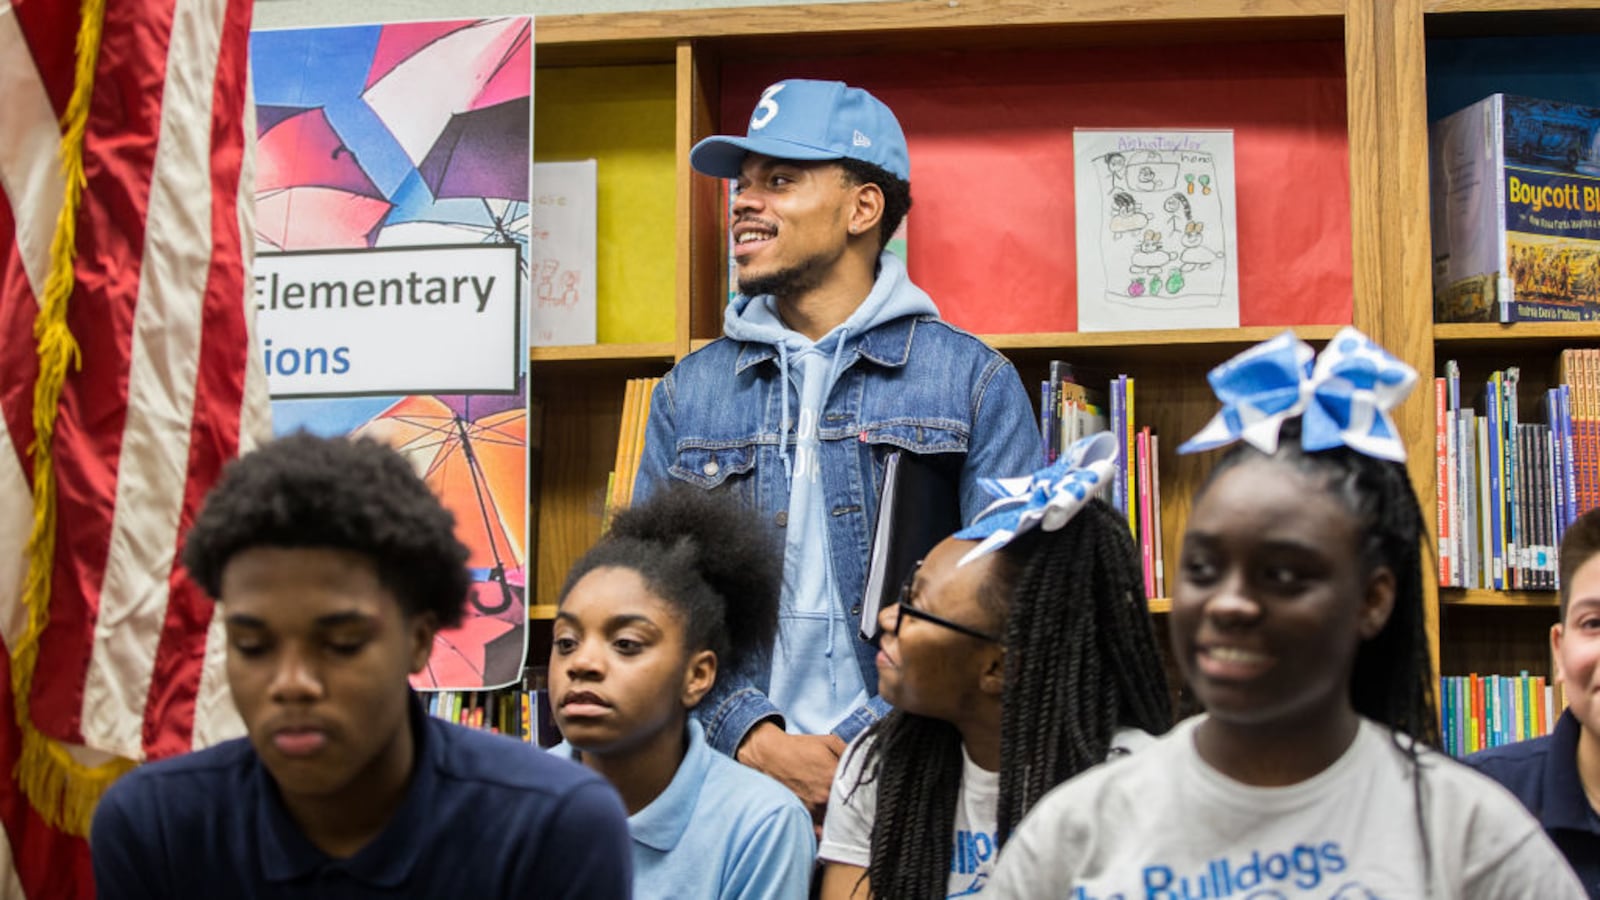 Chance the Rapper holds a press conference at Westcott Elementary School in Chicago's Chatham neighborhood on March 6, 2017. (Zbigniew Bzdak/Chicago Tribune/TNS via Getty Images)